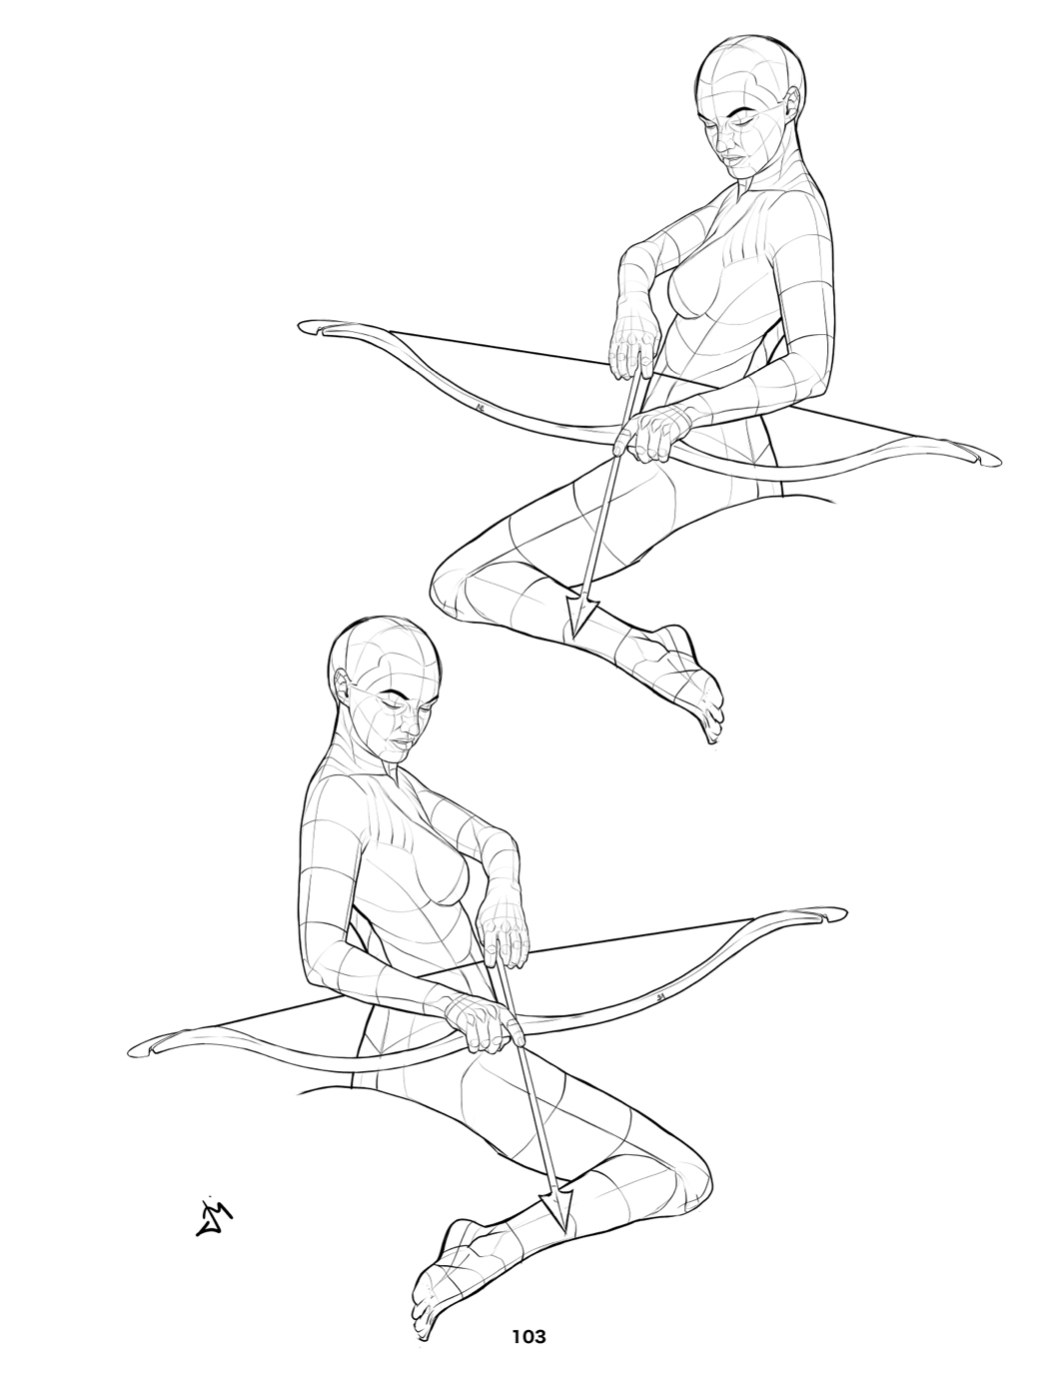 Easy Tips] How to Draw Sword Poses [Enhance Your Character] | MediBang  Paint - the free digital painting and manga creation software